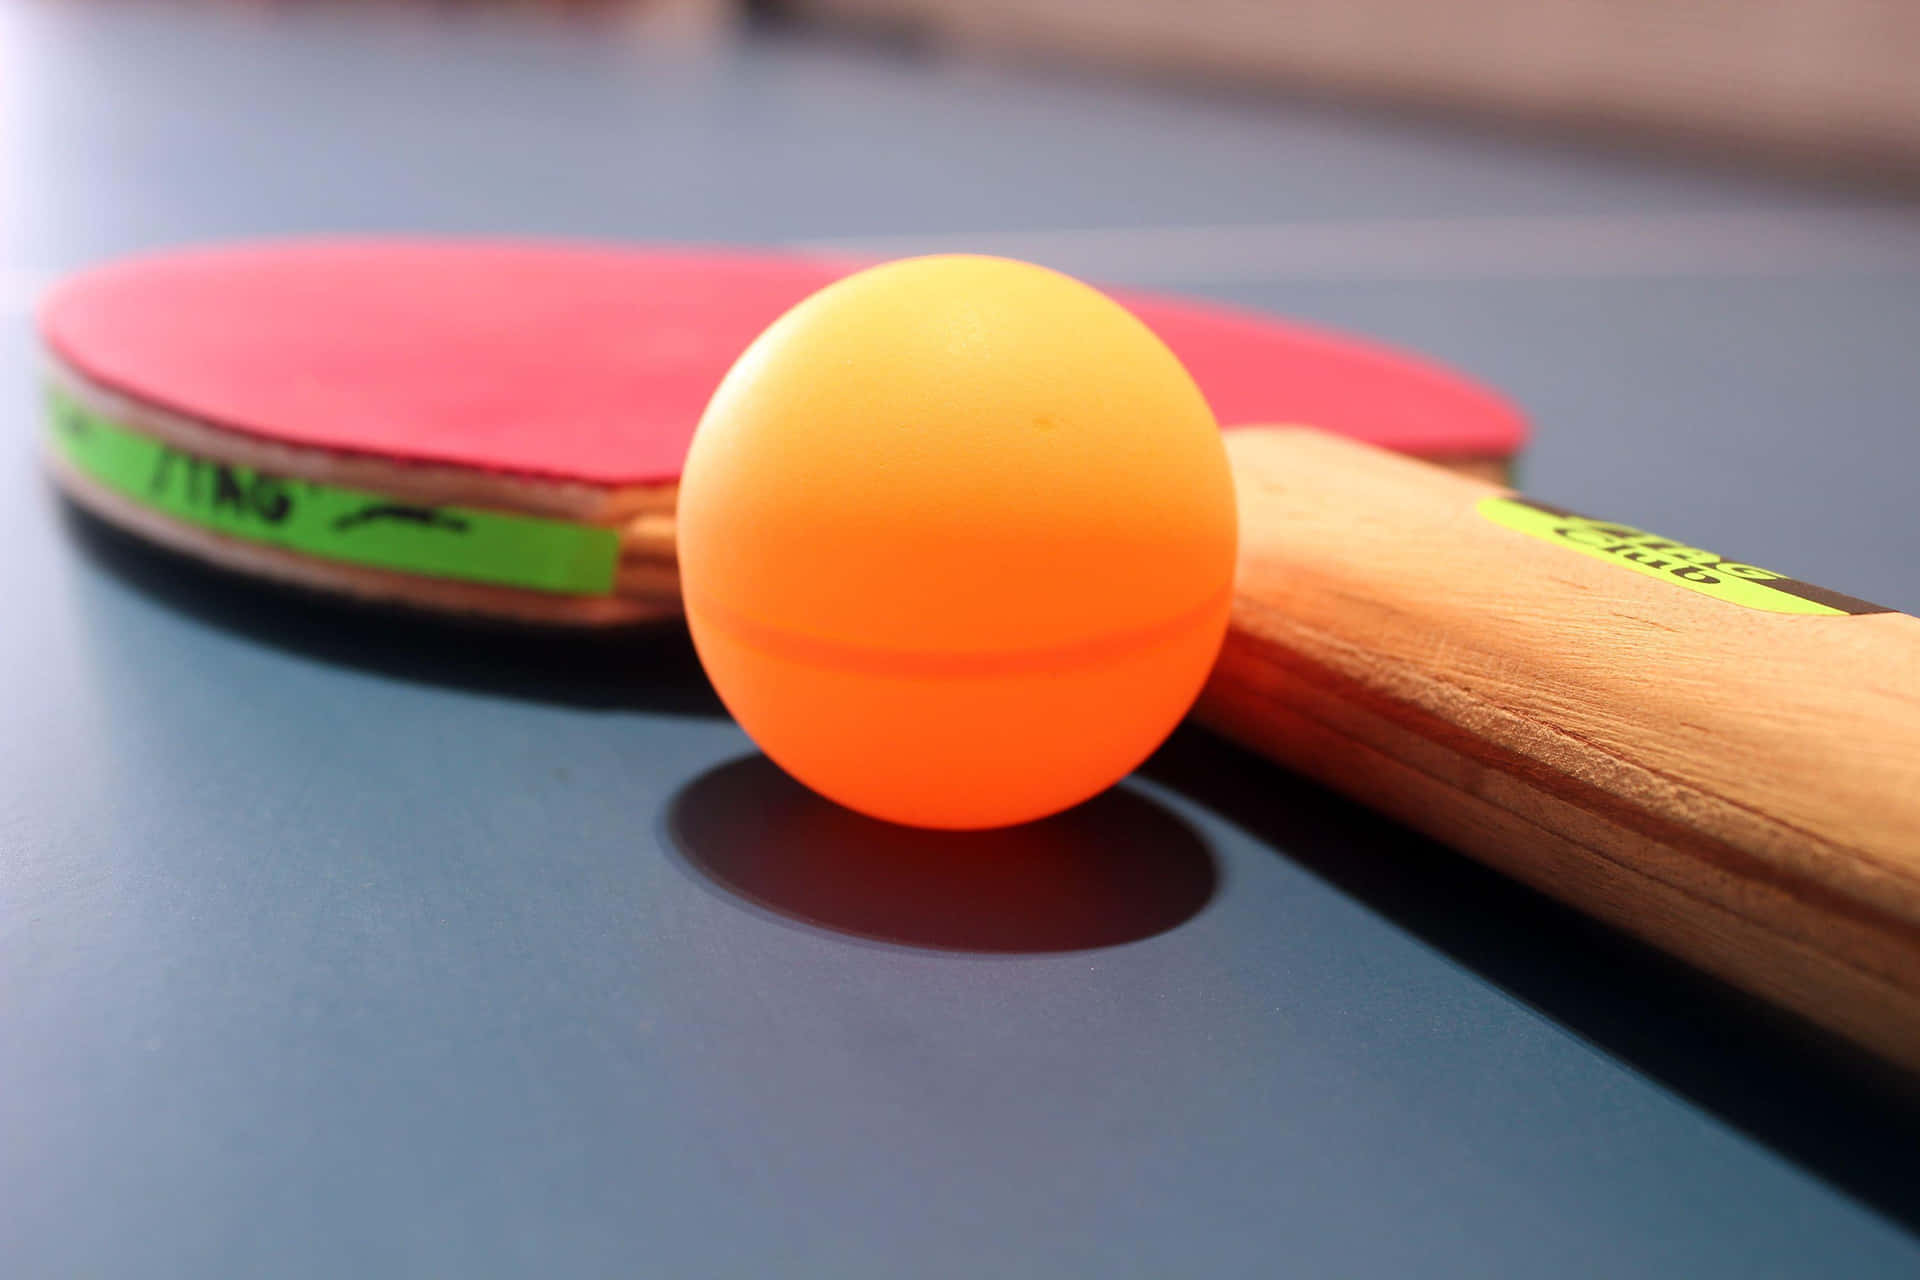 A Ping Pong Paddle And An Orange Ball